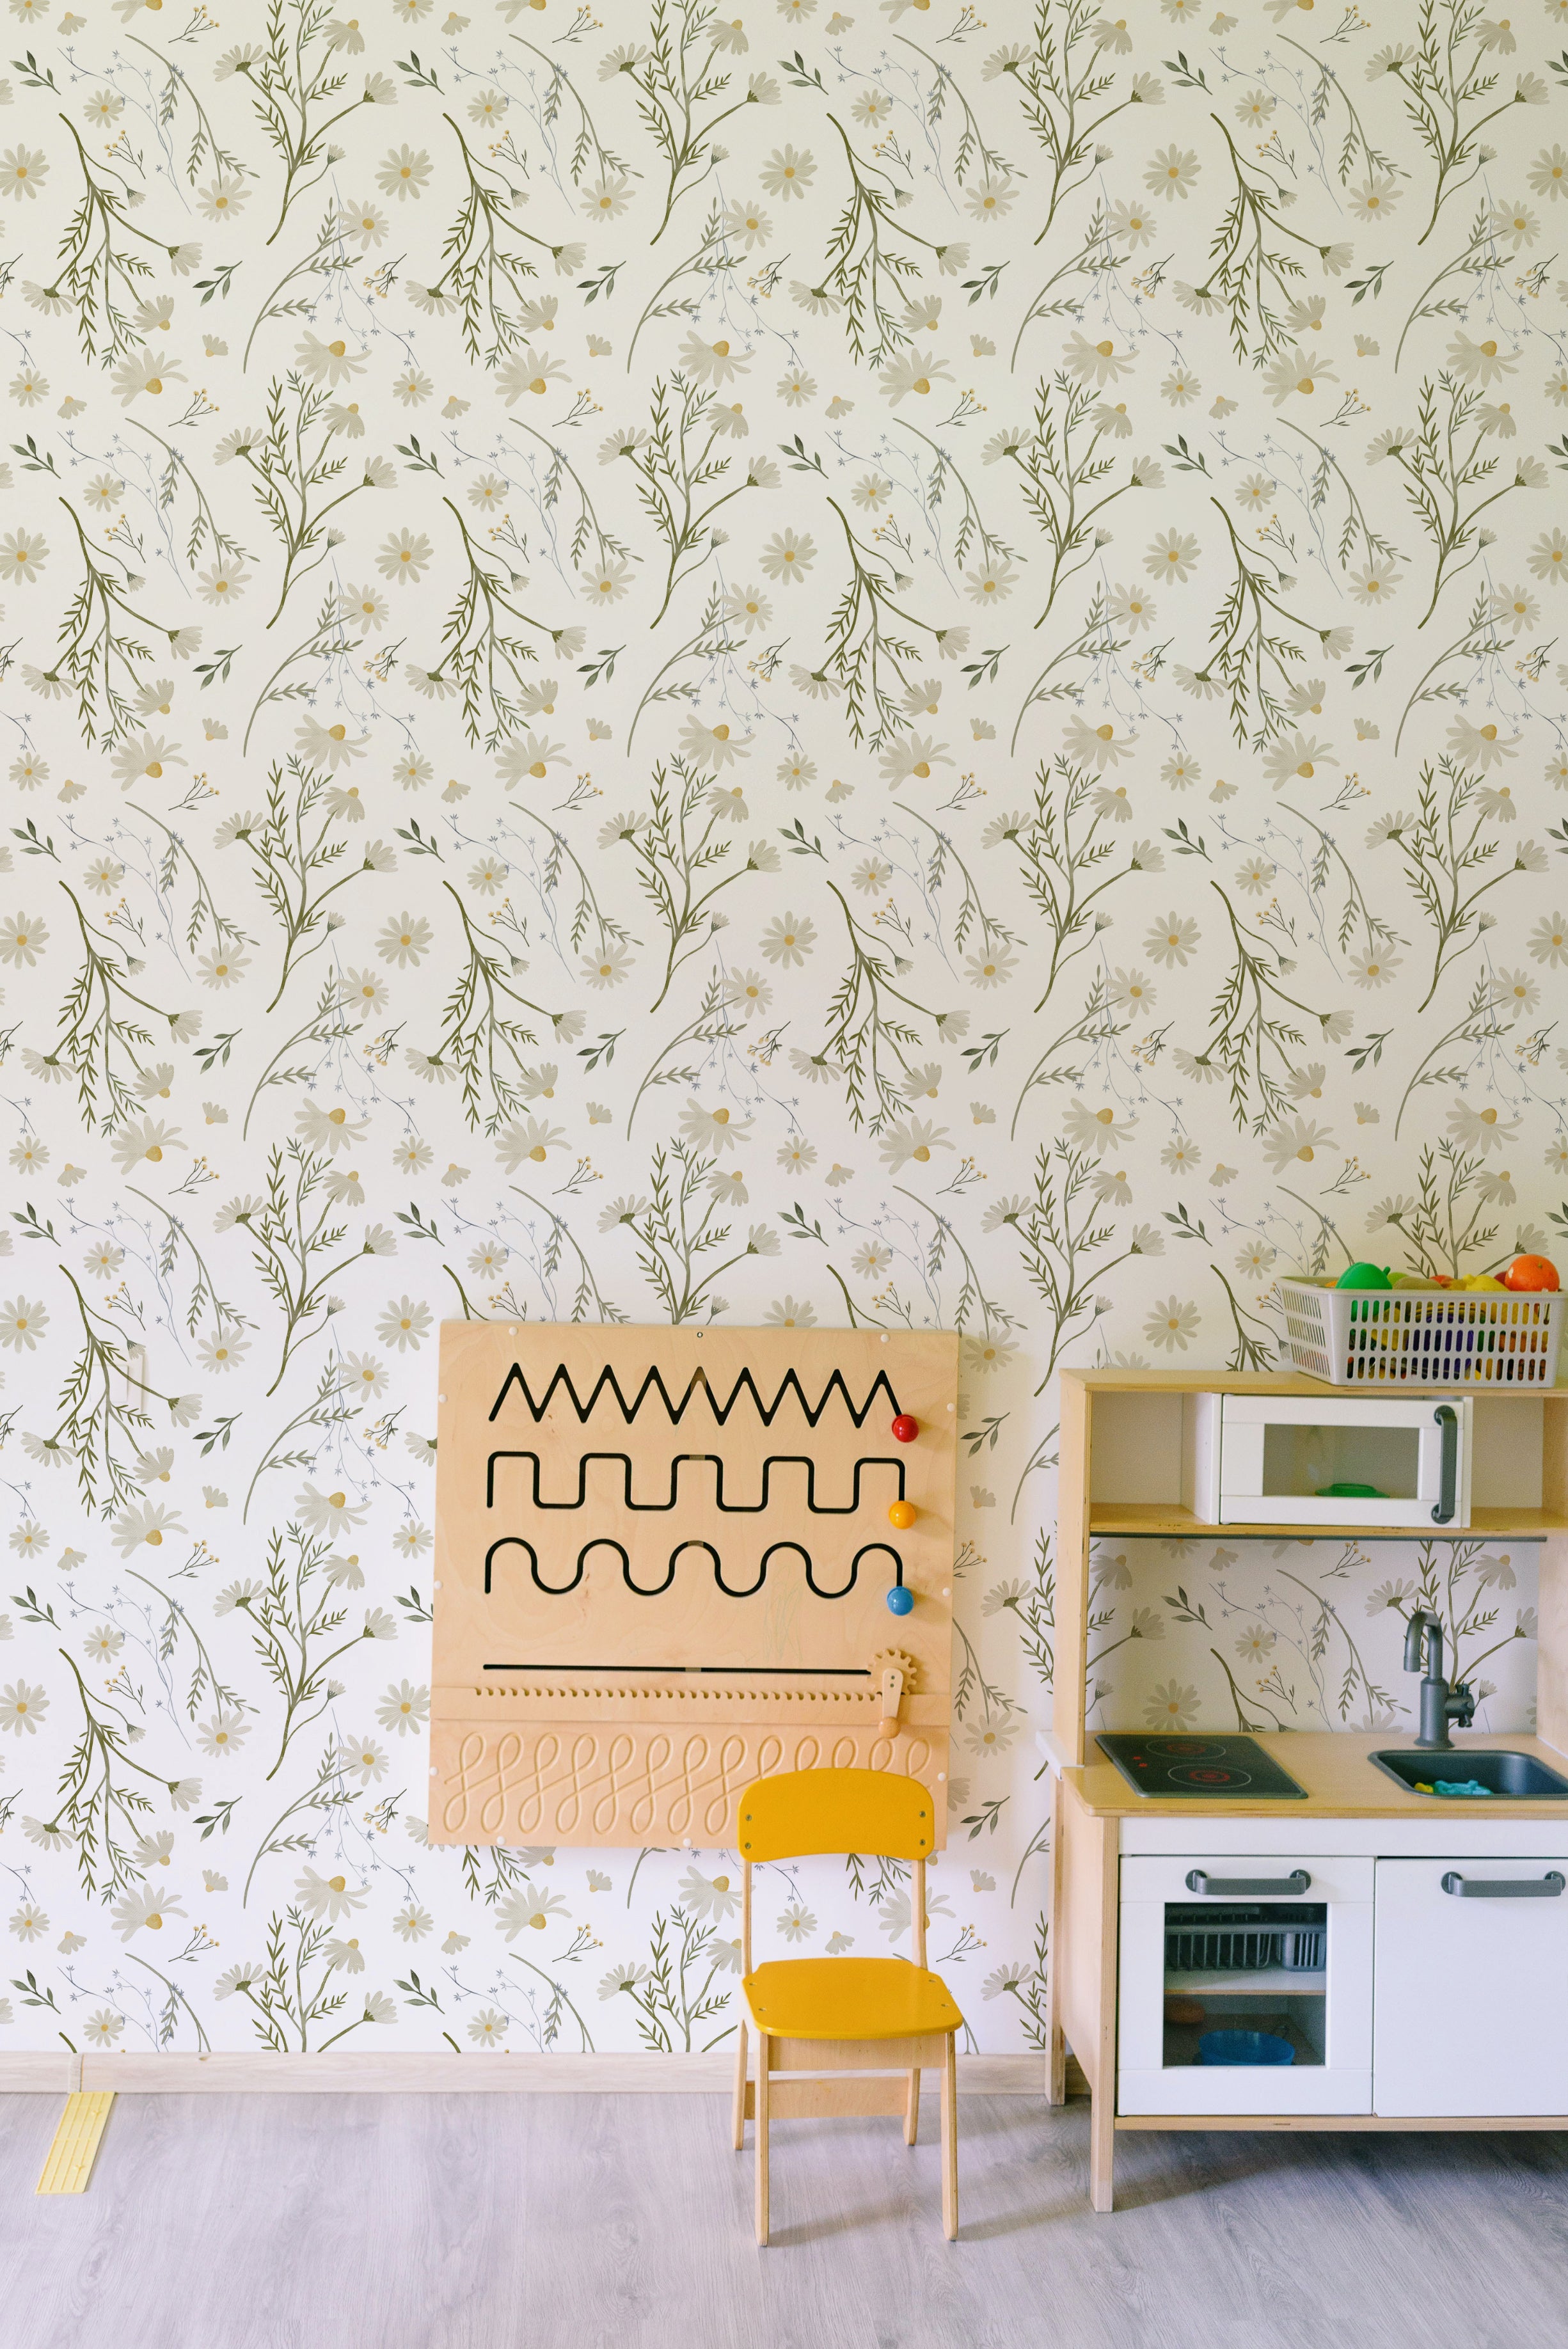 A cozy children's playroom with Daisy Bouquet Wallpaper featuring delicate daisies and foliage in soft greens and yellows on a white background. The room includes a child-sized wooden chair in yellow, a matching wooden play kitchen, and an educational wooden wall-mounted activity board with sliding beads and shapes